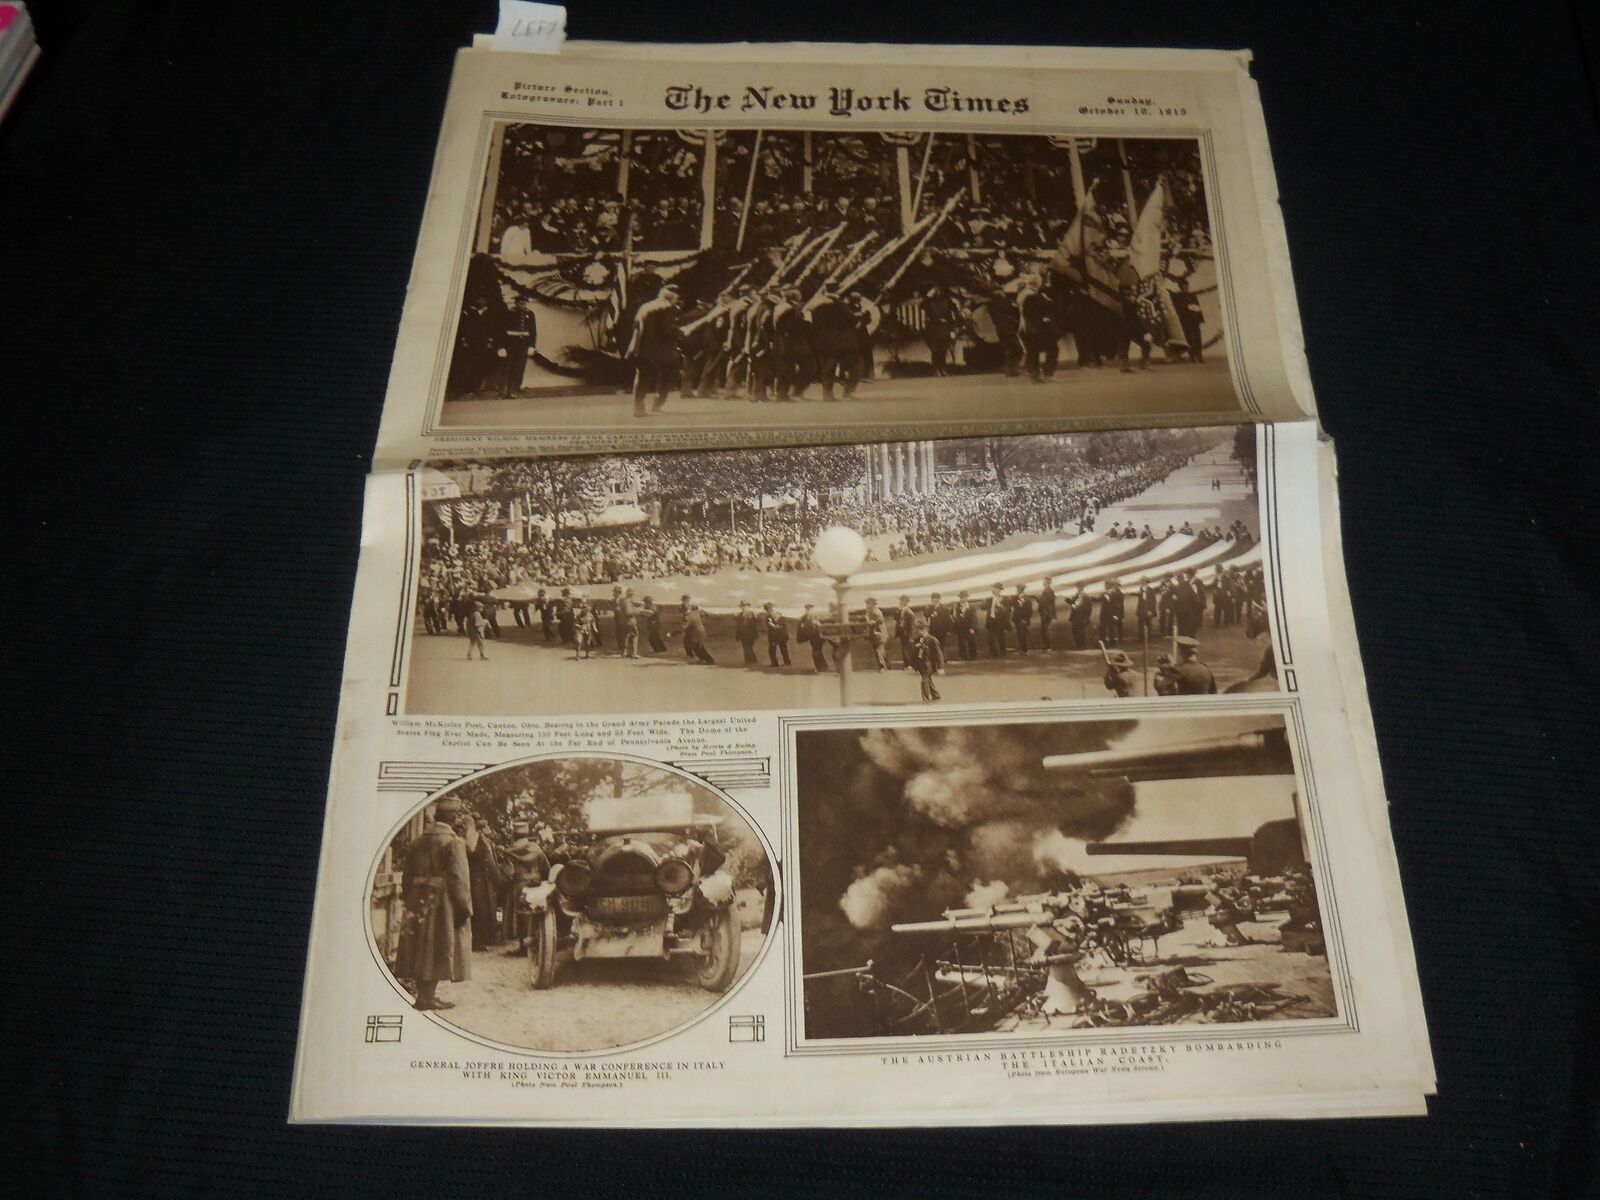 1915 OCTOBER 10 NEW YORK TIMES PICTURE SECTION - ST. FRANCIS BELLINI - NP 5603